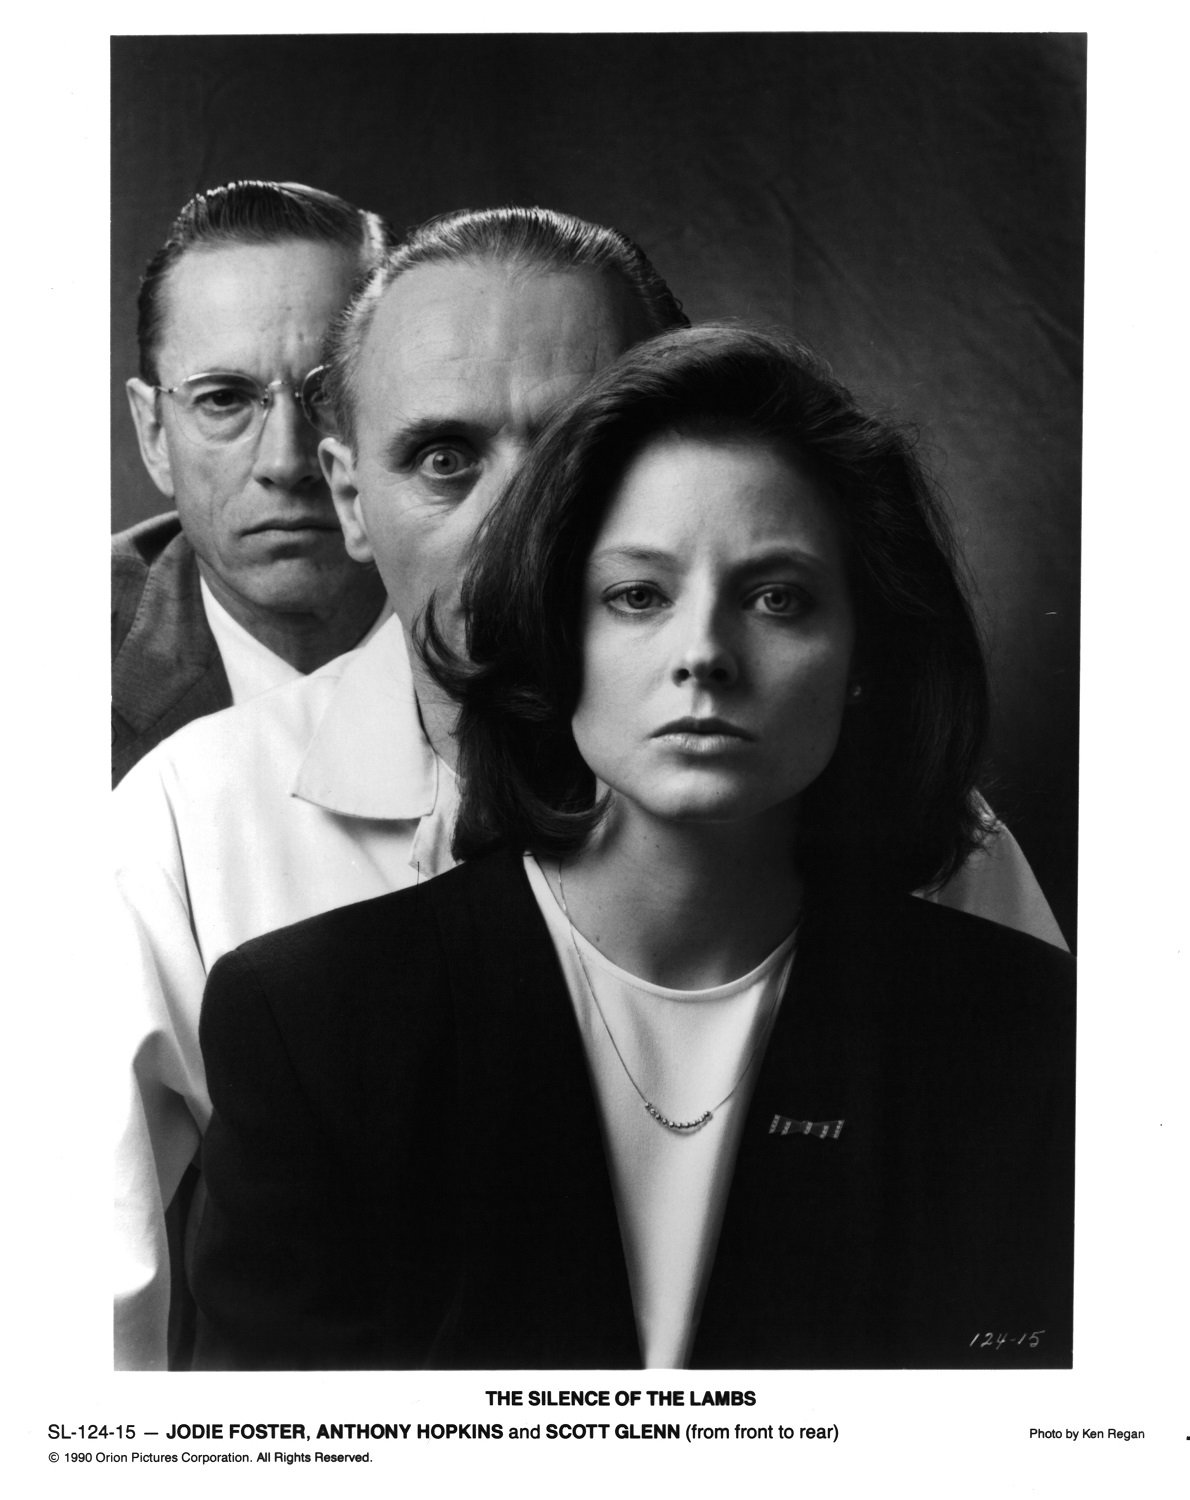 Scott Glenn, Anthony Hopkins and Jodie Foster in 'The Silence of the Lambs '